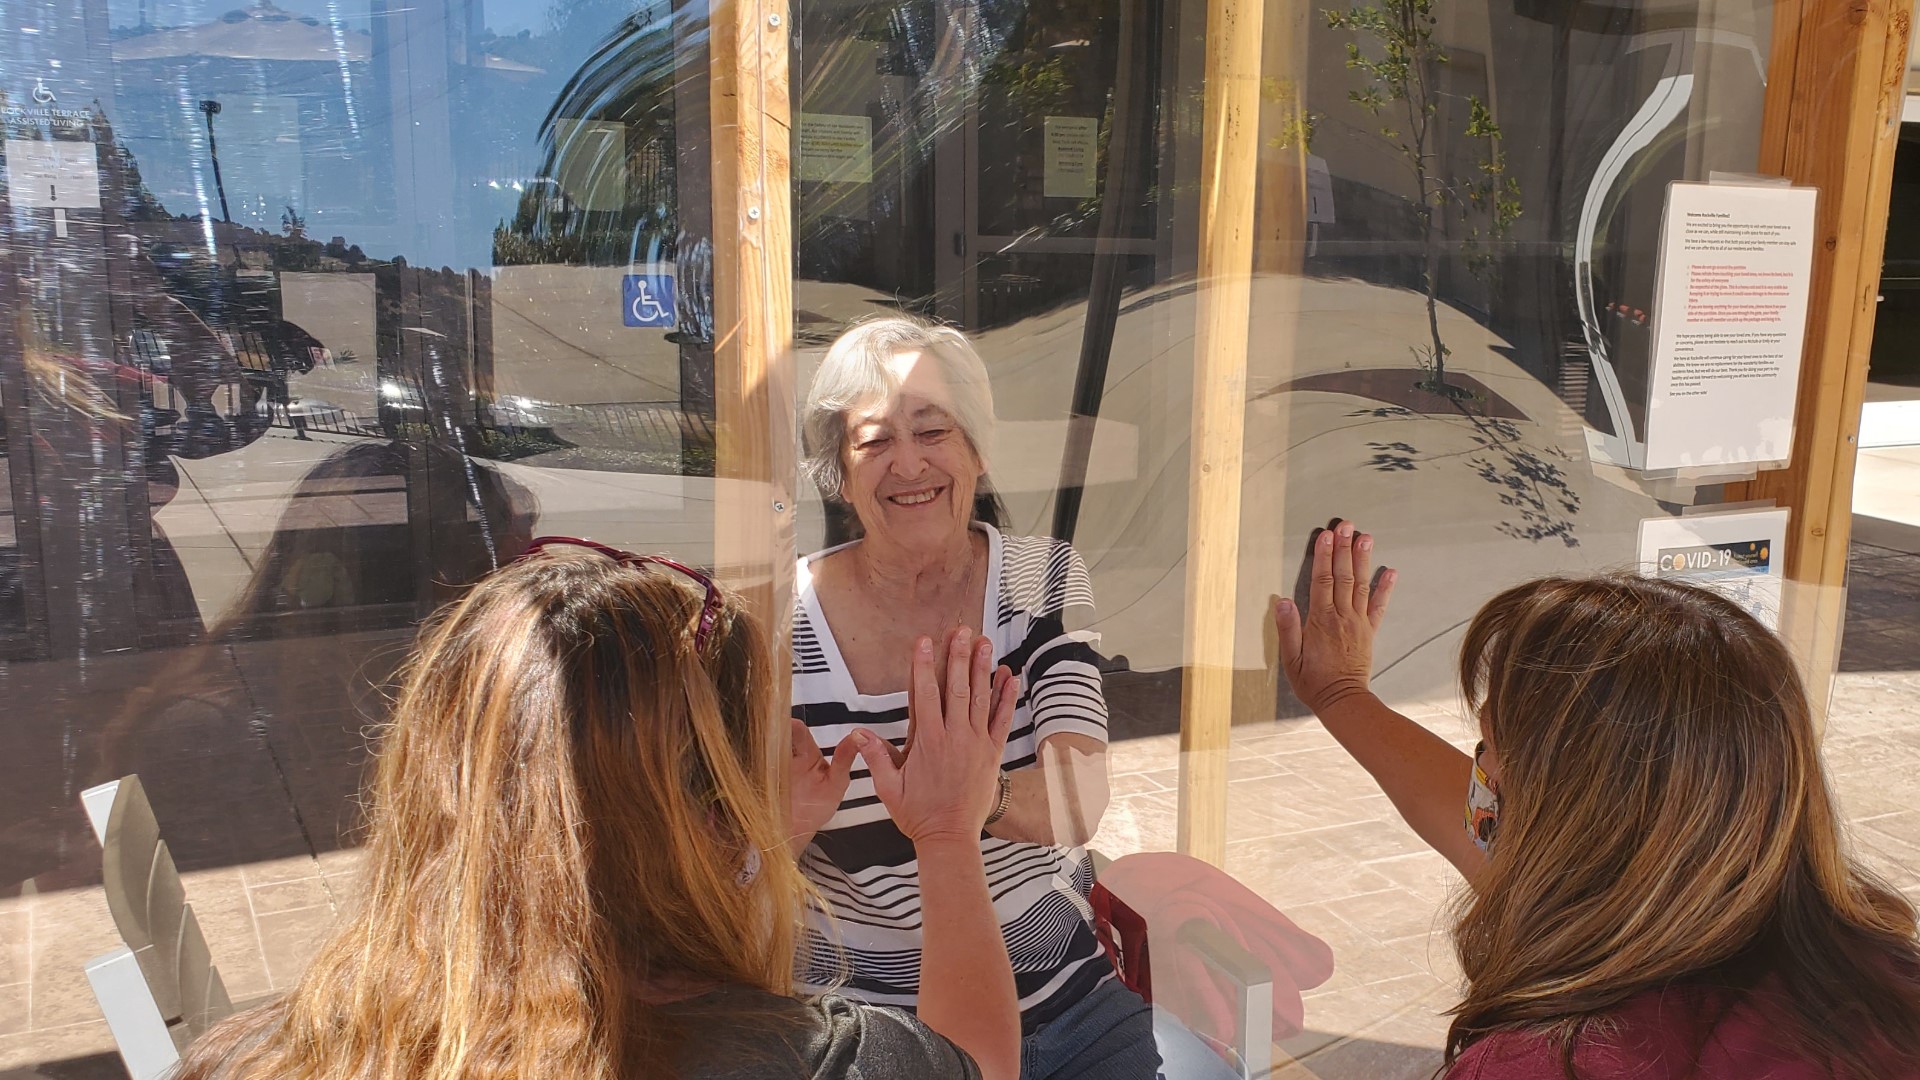 At three long-term care facilities in California, families got to visit loved ones through Plexiglas after COVID-19 forced nursing homes to restrict visitation.